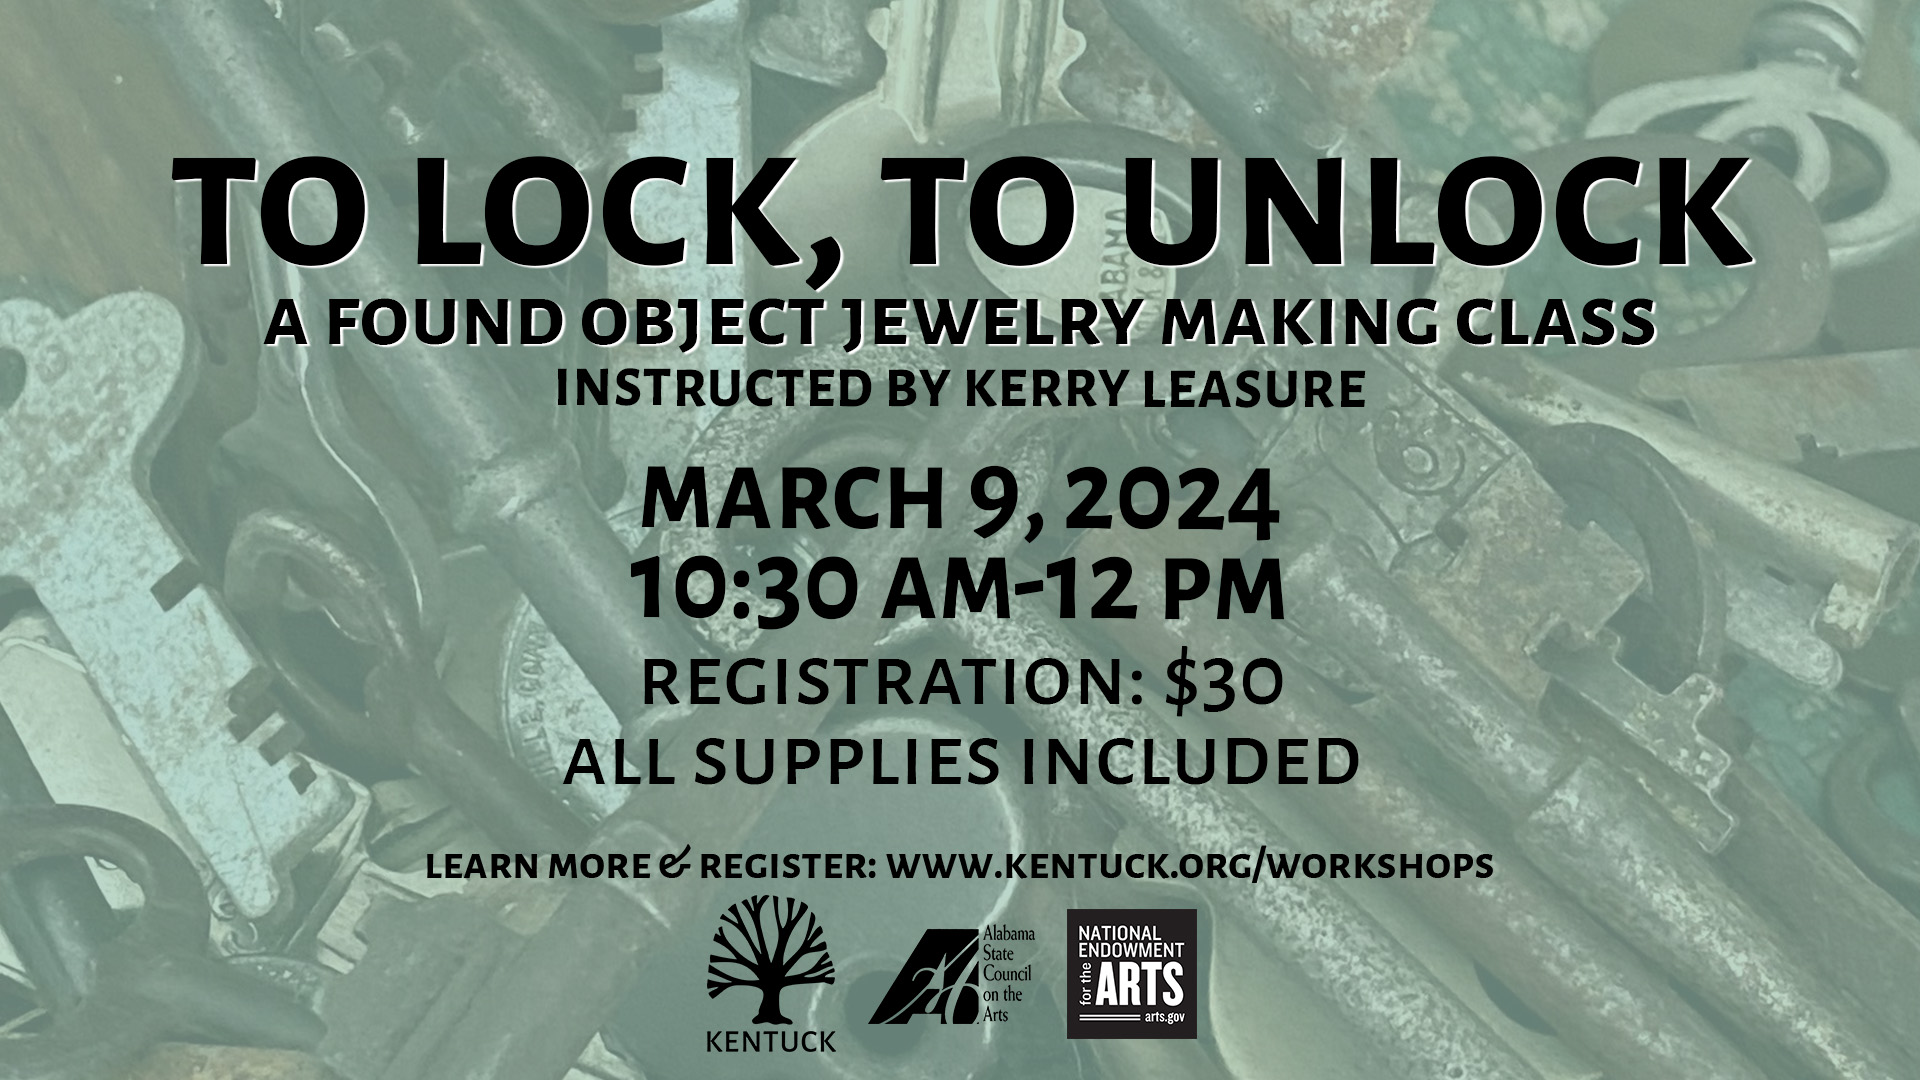 To Lock, To Unlock: A Found Object Jewelry Making Class with Kerry Leasure